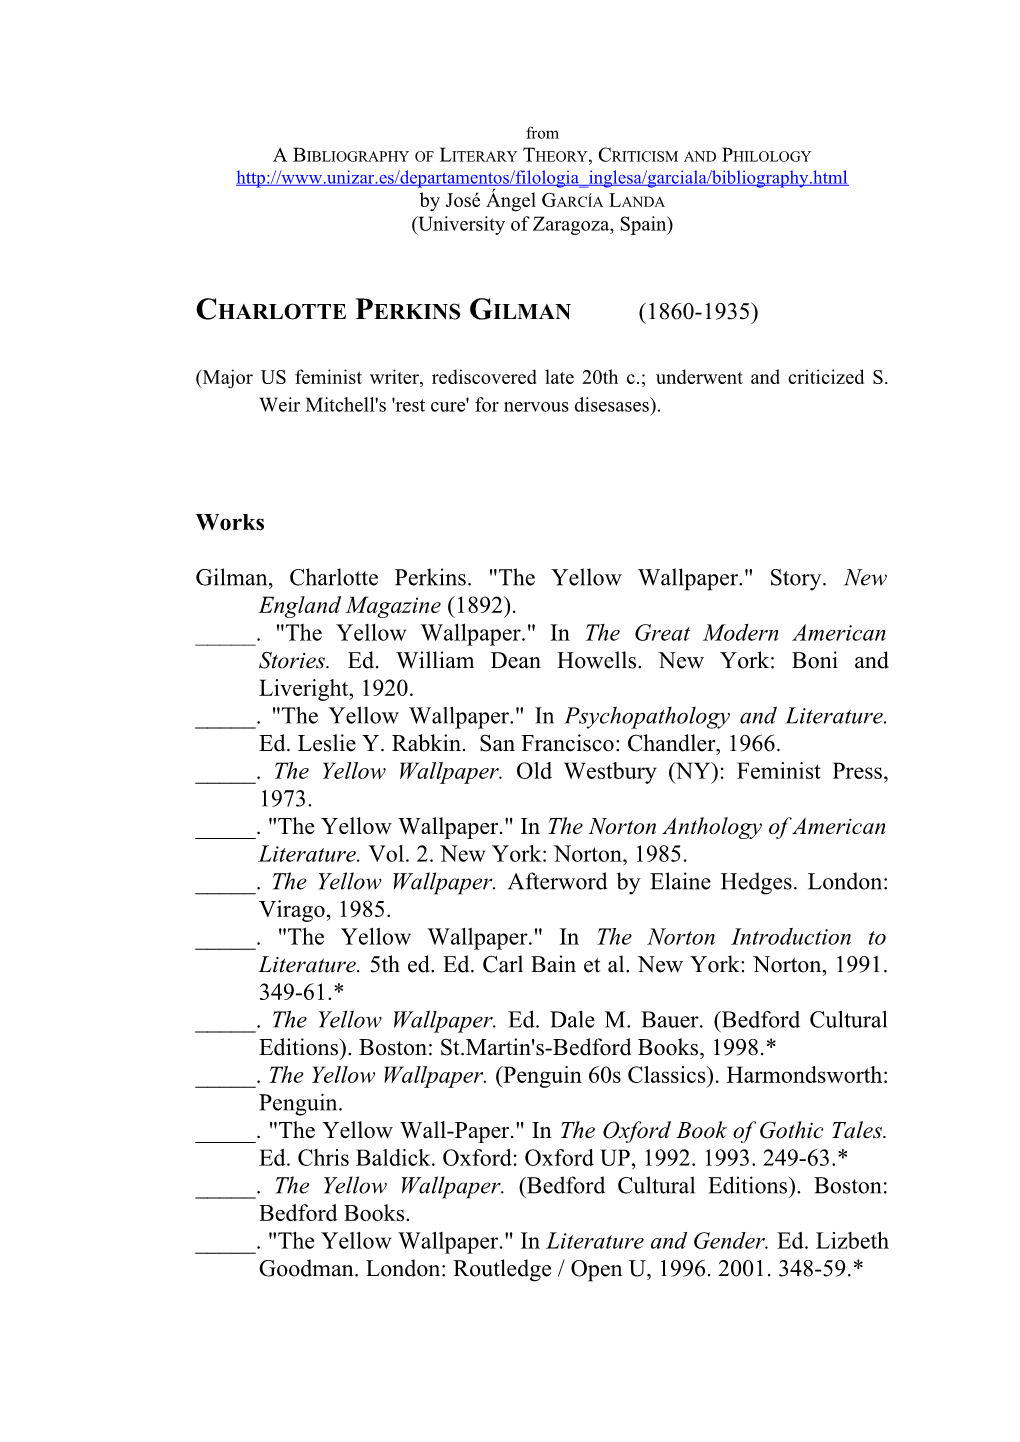 A Bibliography of Literary Theory, Criticism and Philology s94